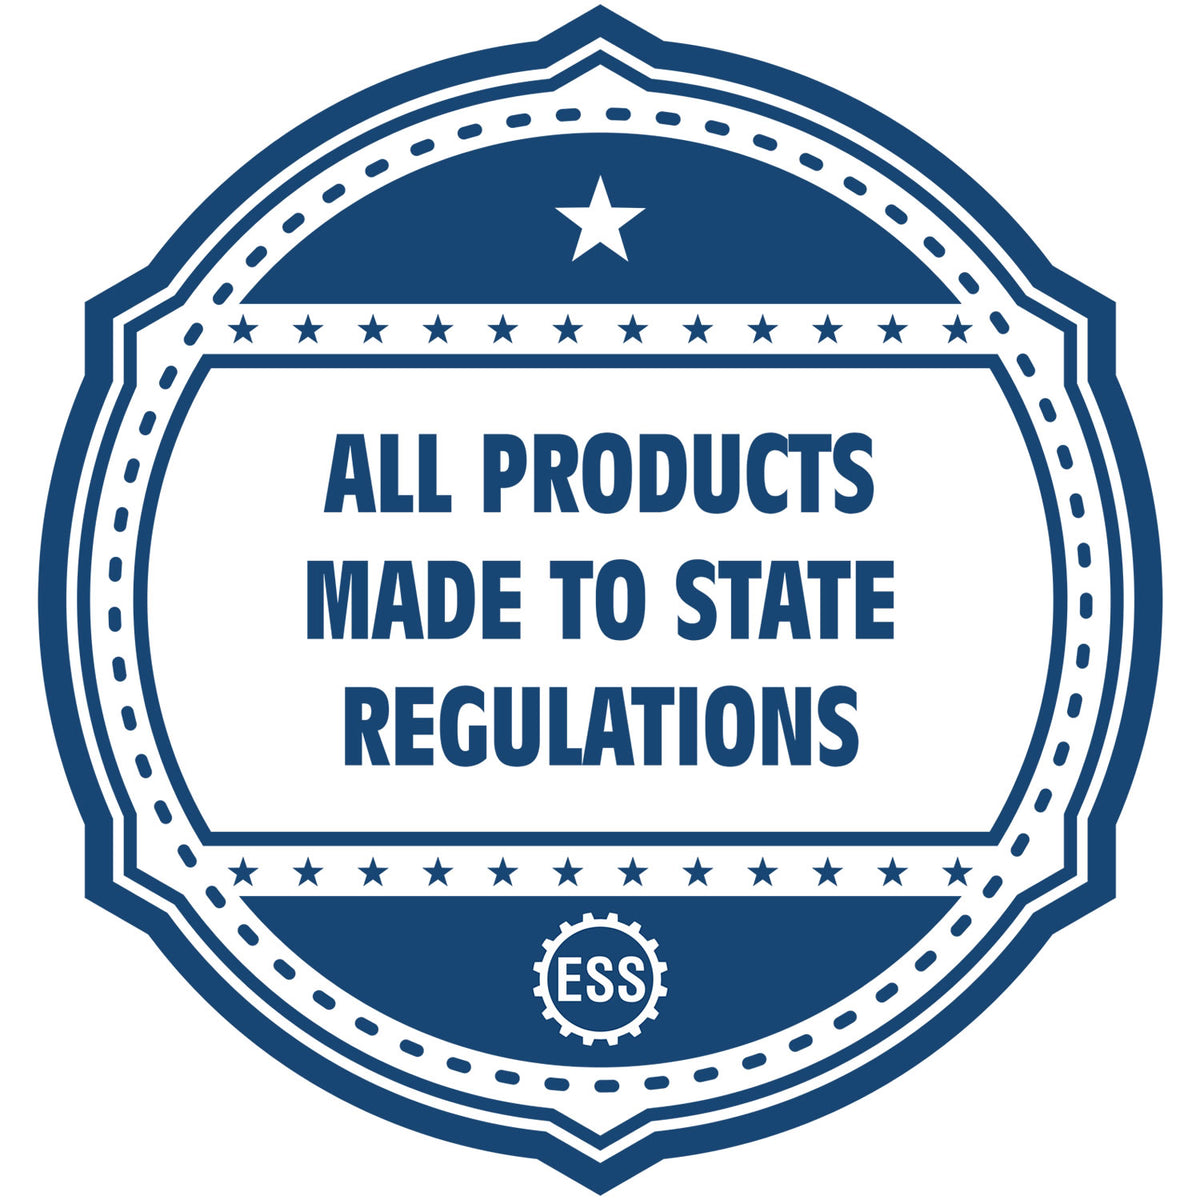 An icon or badge element for the Soft Alabama Professional Engineer Seal showing that this product is made in compliance with state regulations.